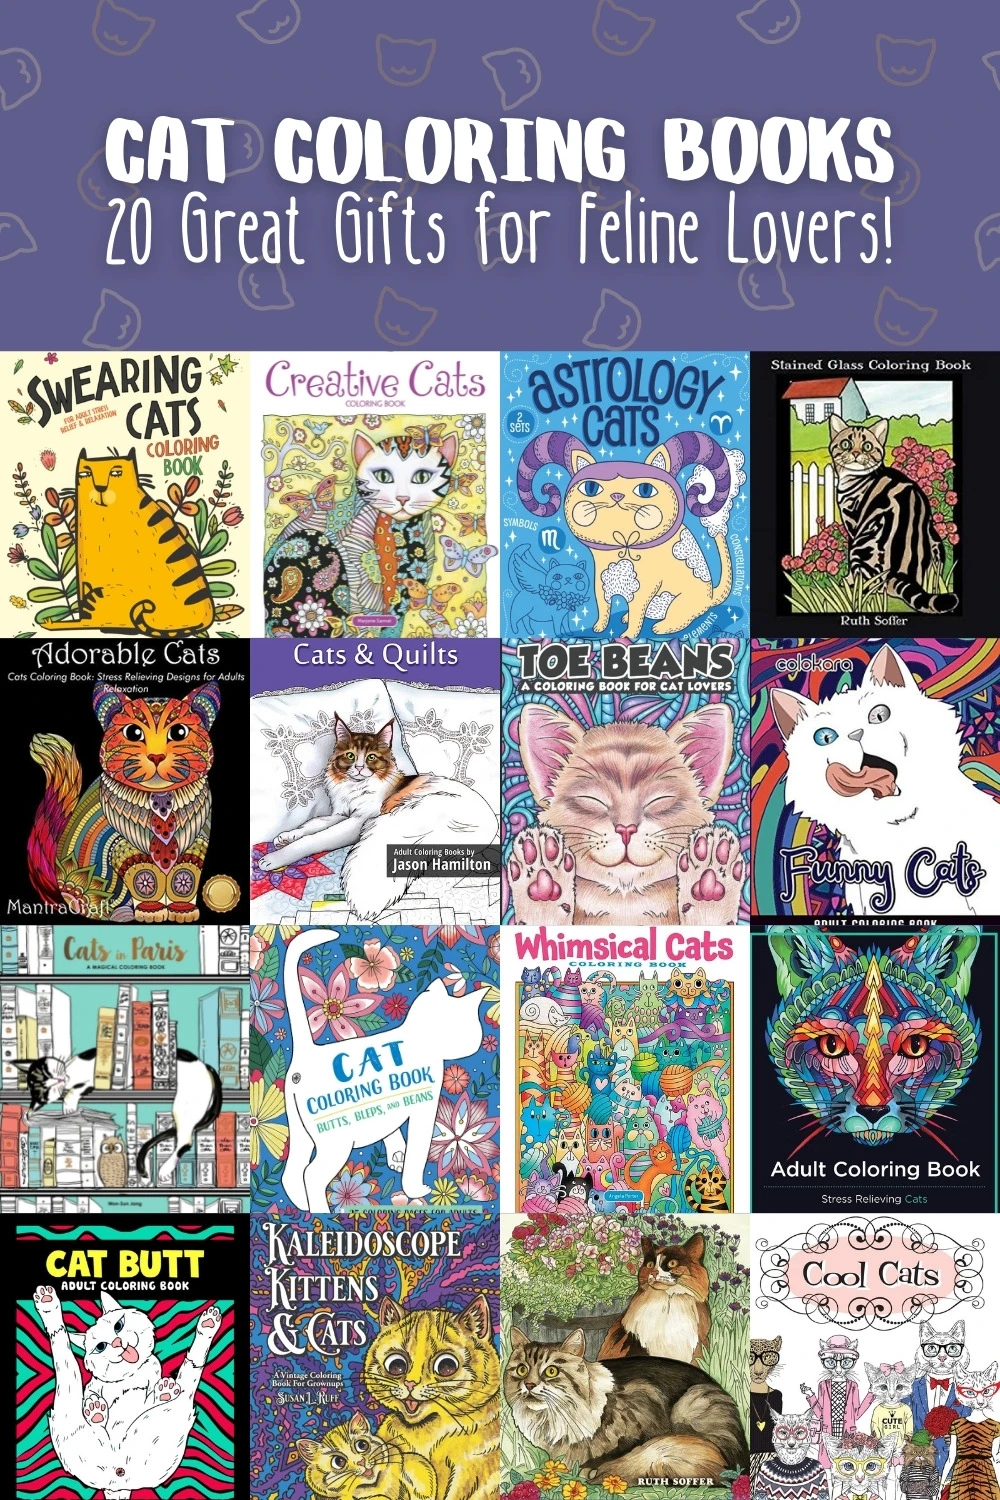 Cat Coloring Books for Feline Lovers (Great Gifts!) - DIY Candy